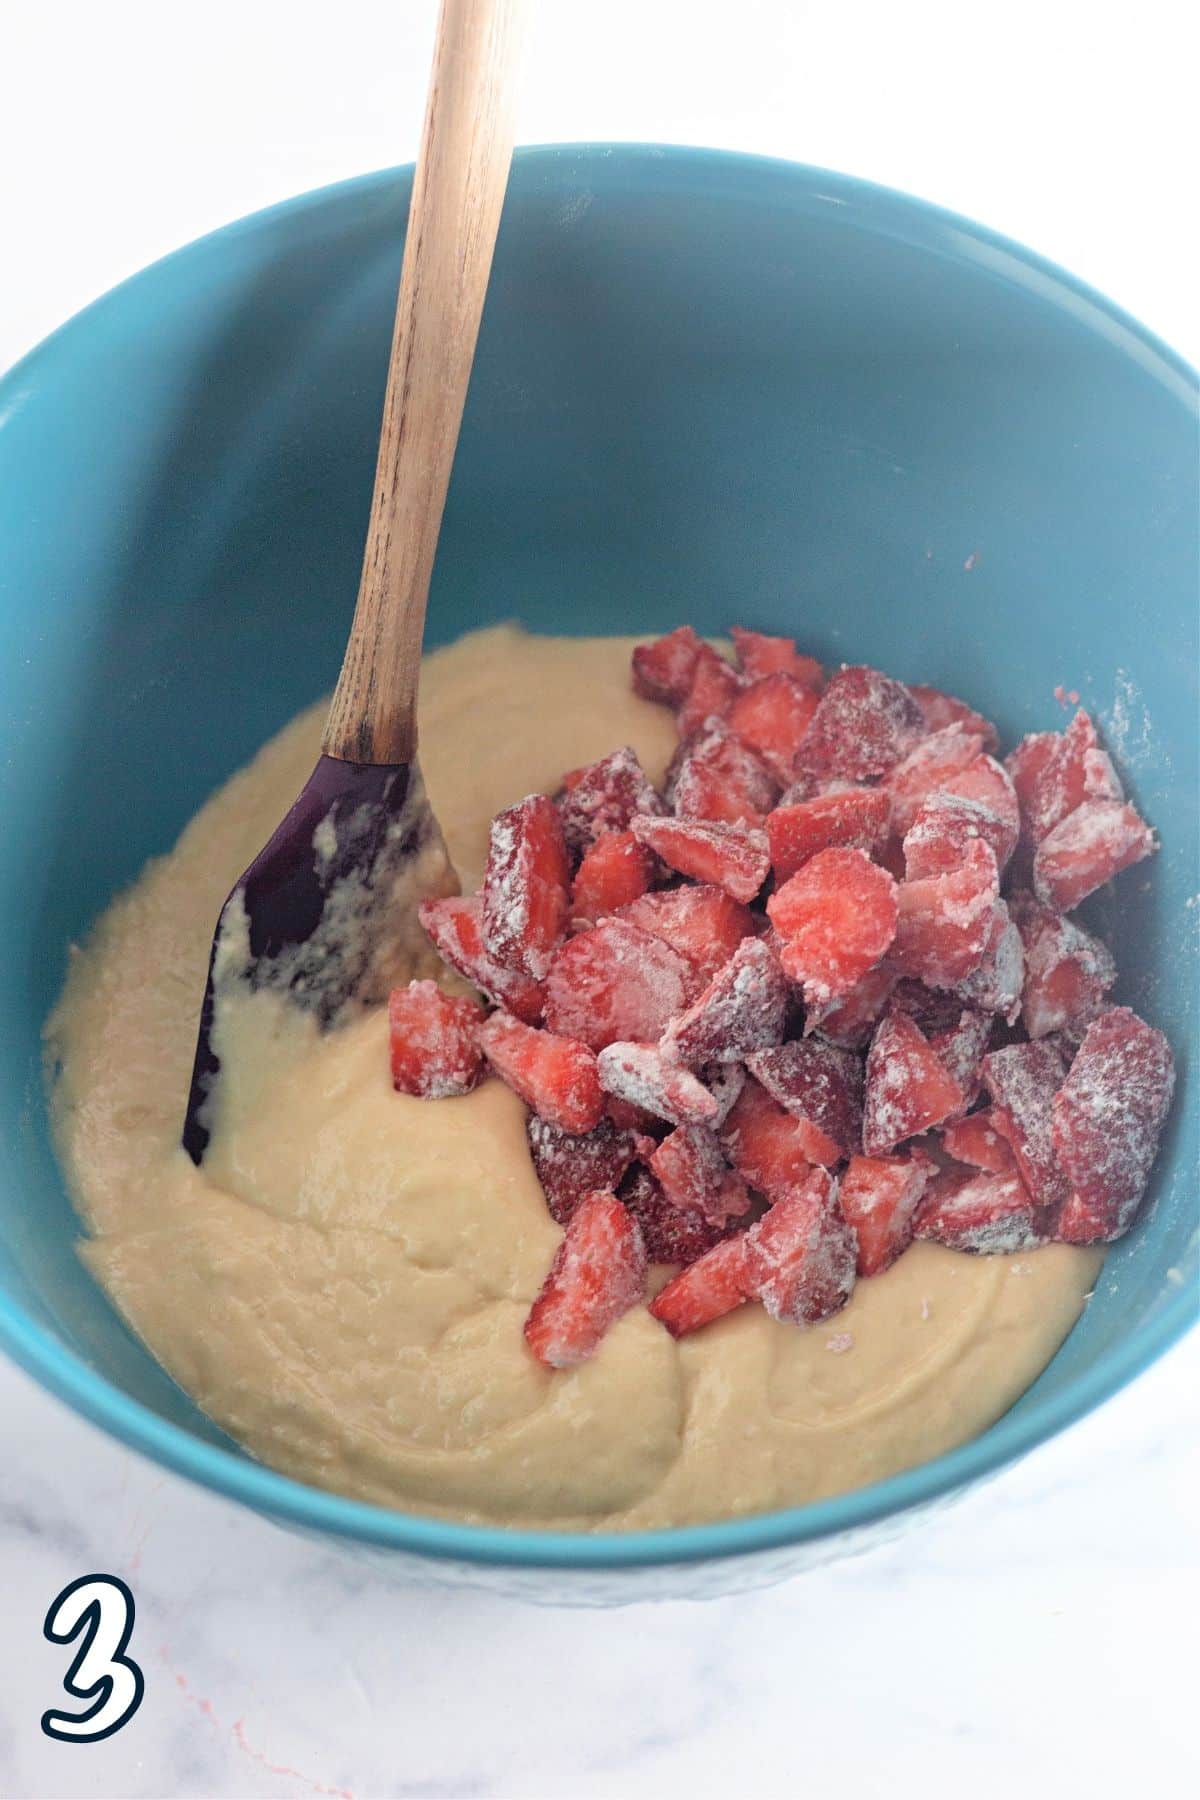 Strawberries that have been dusted with flour added to coffee cake batter. 